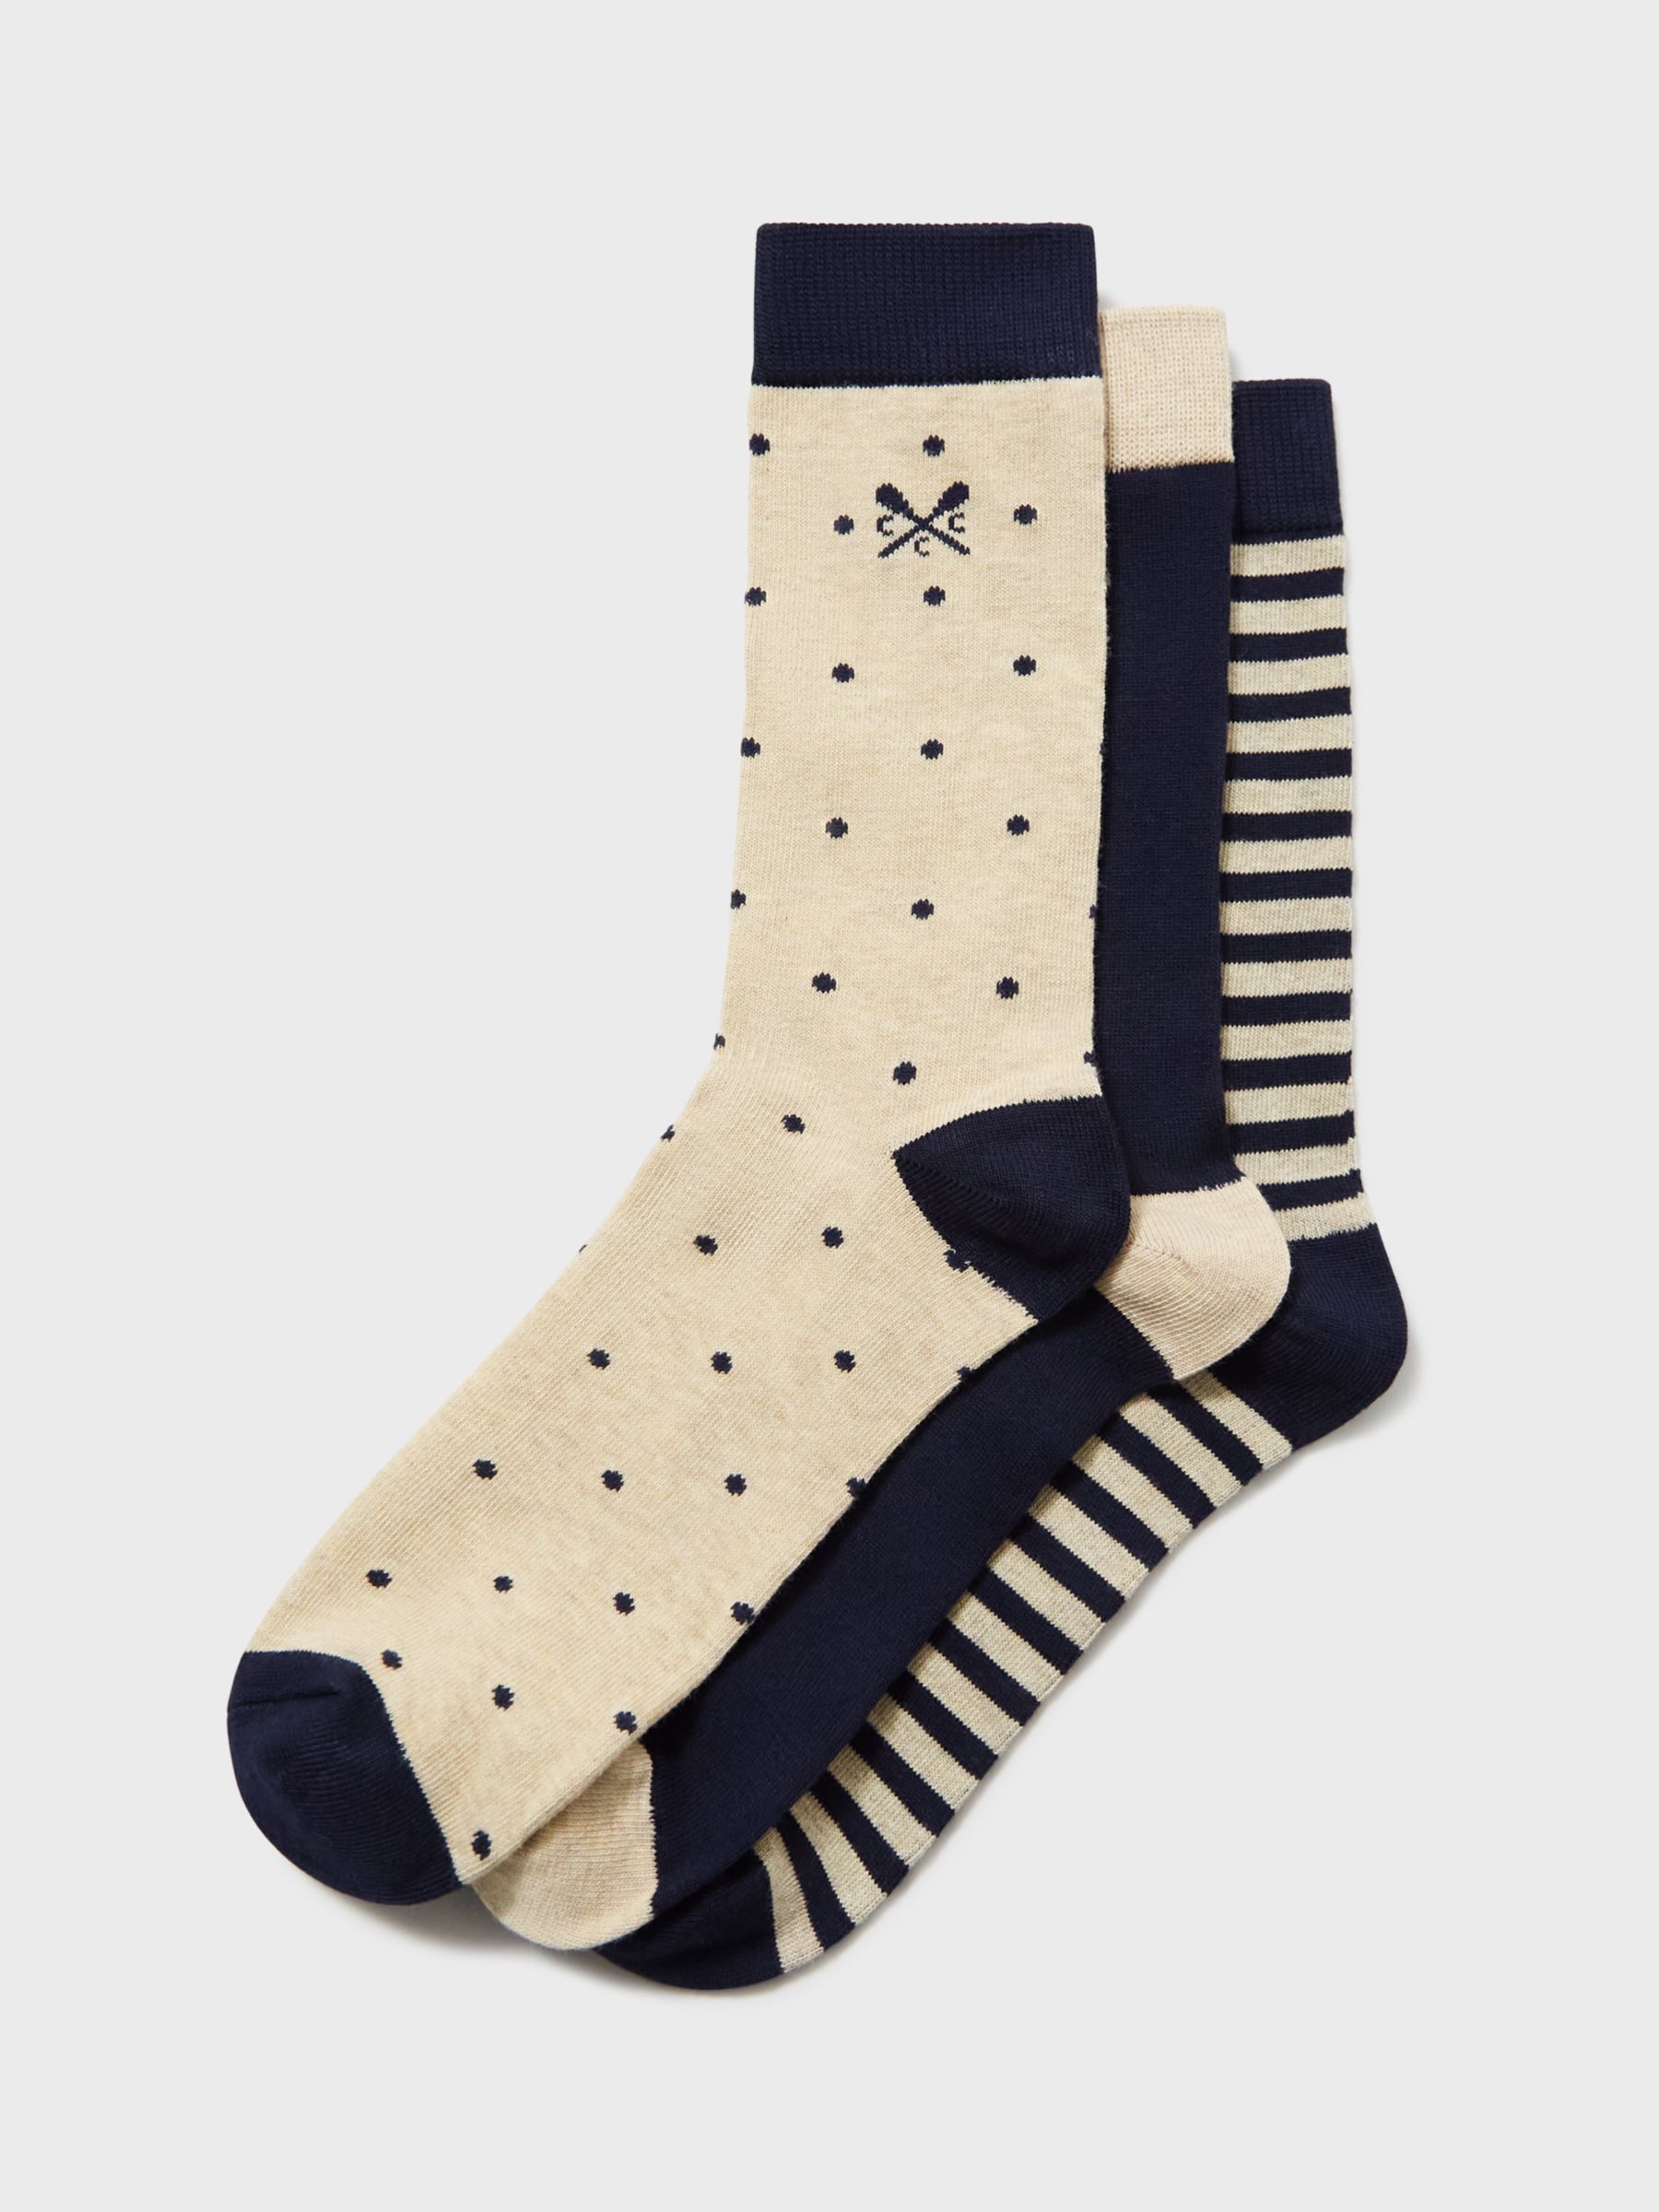 Buy Crew Clothing Patterned Bamboo Socks, Pack of 3, Navy/Cream Online at johnlewis.com